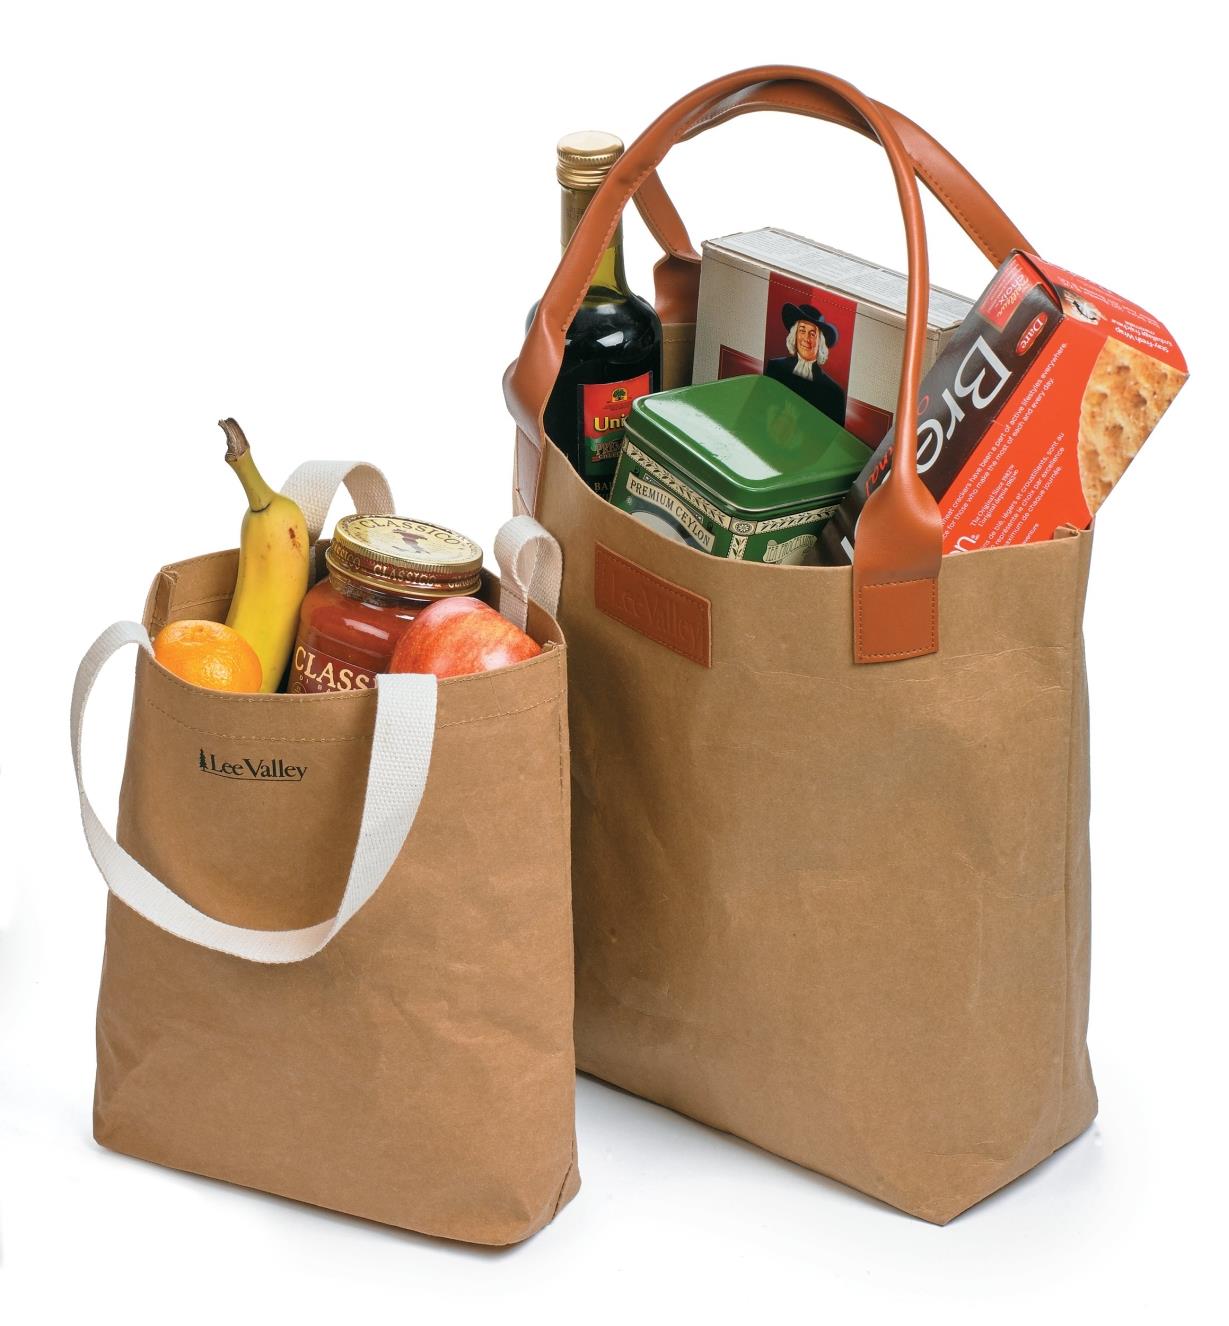 Two Tree Leather Tote Bags filled with groceries